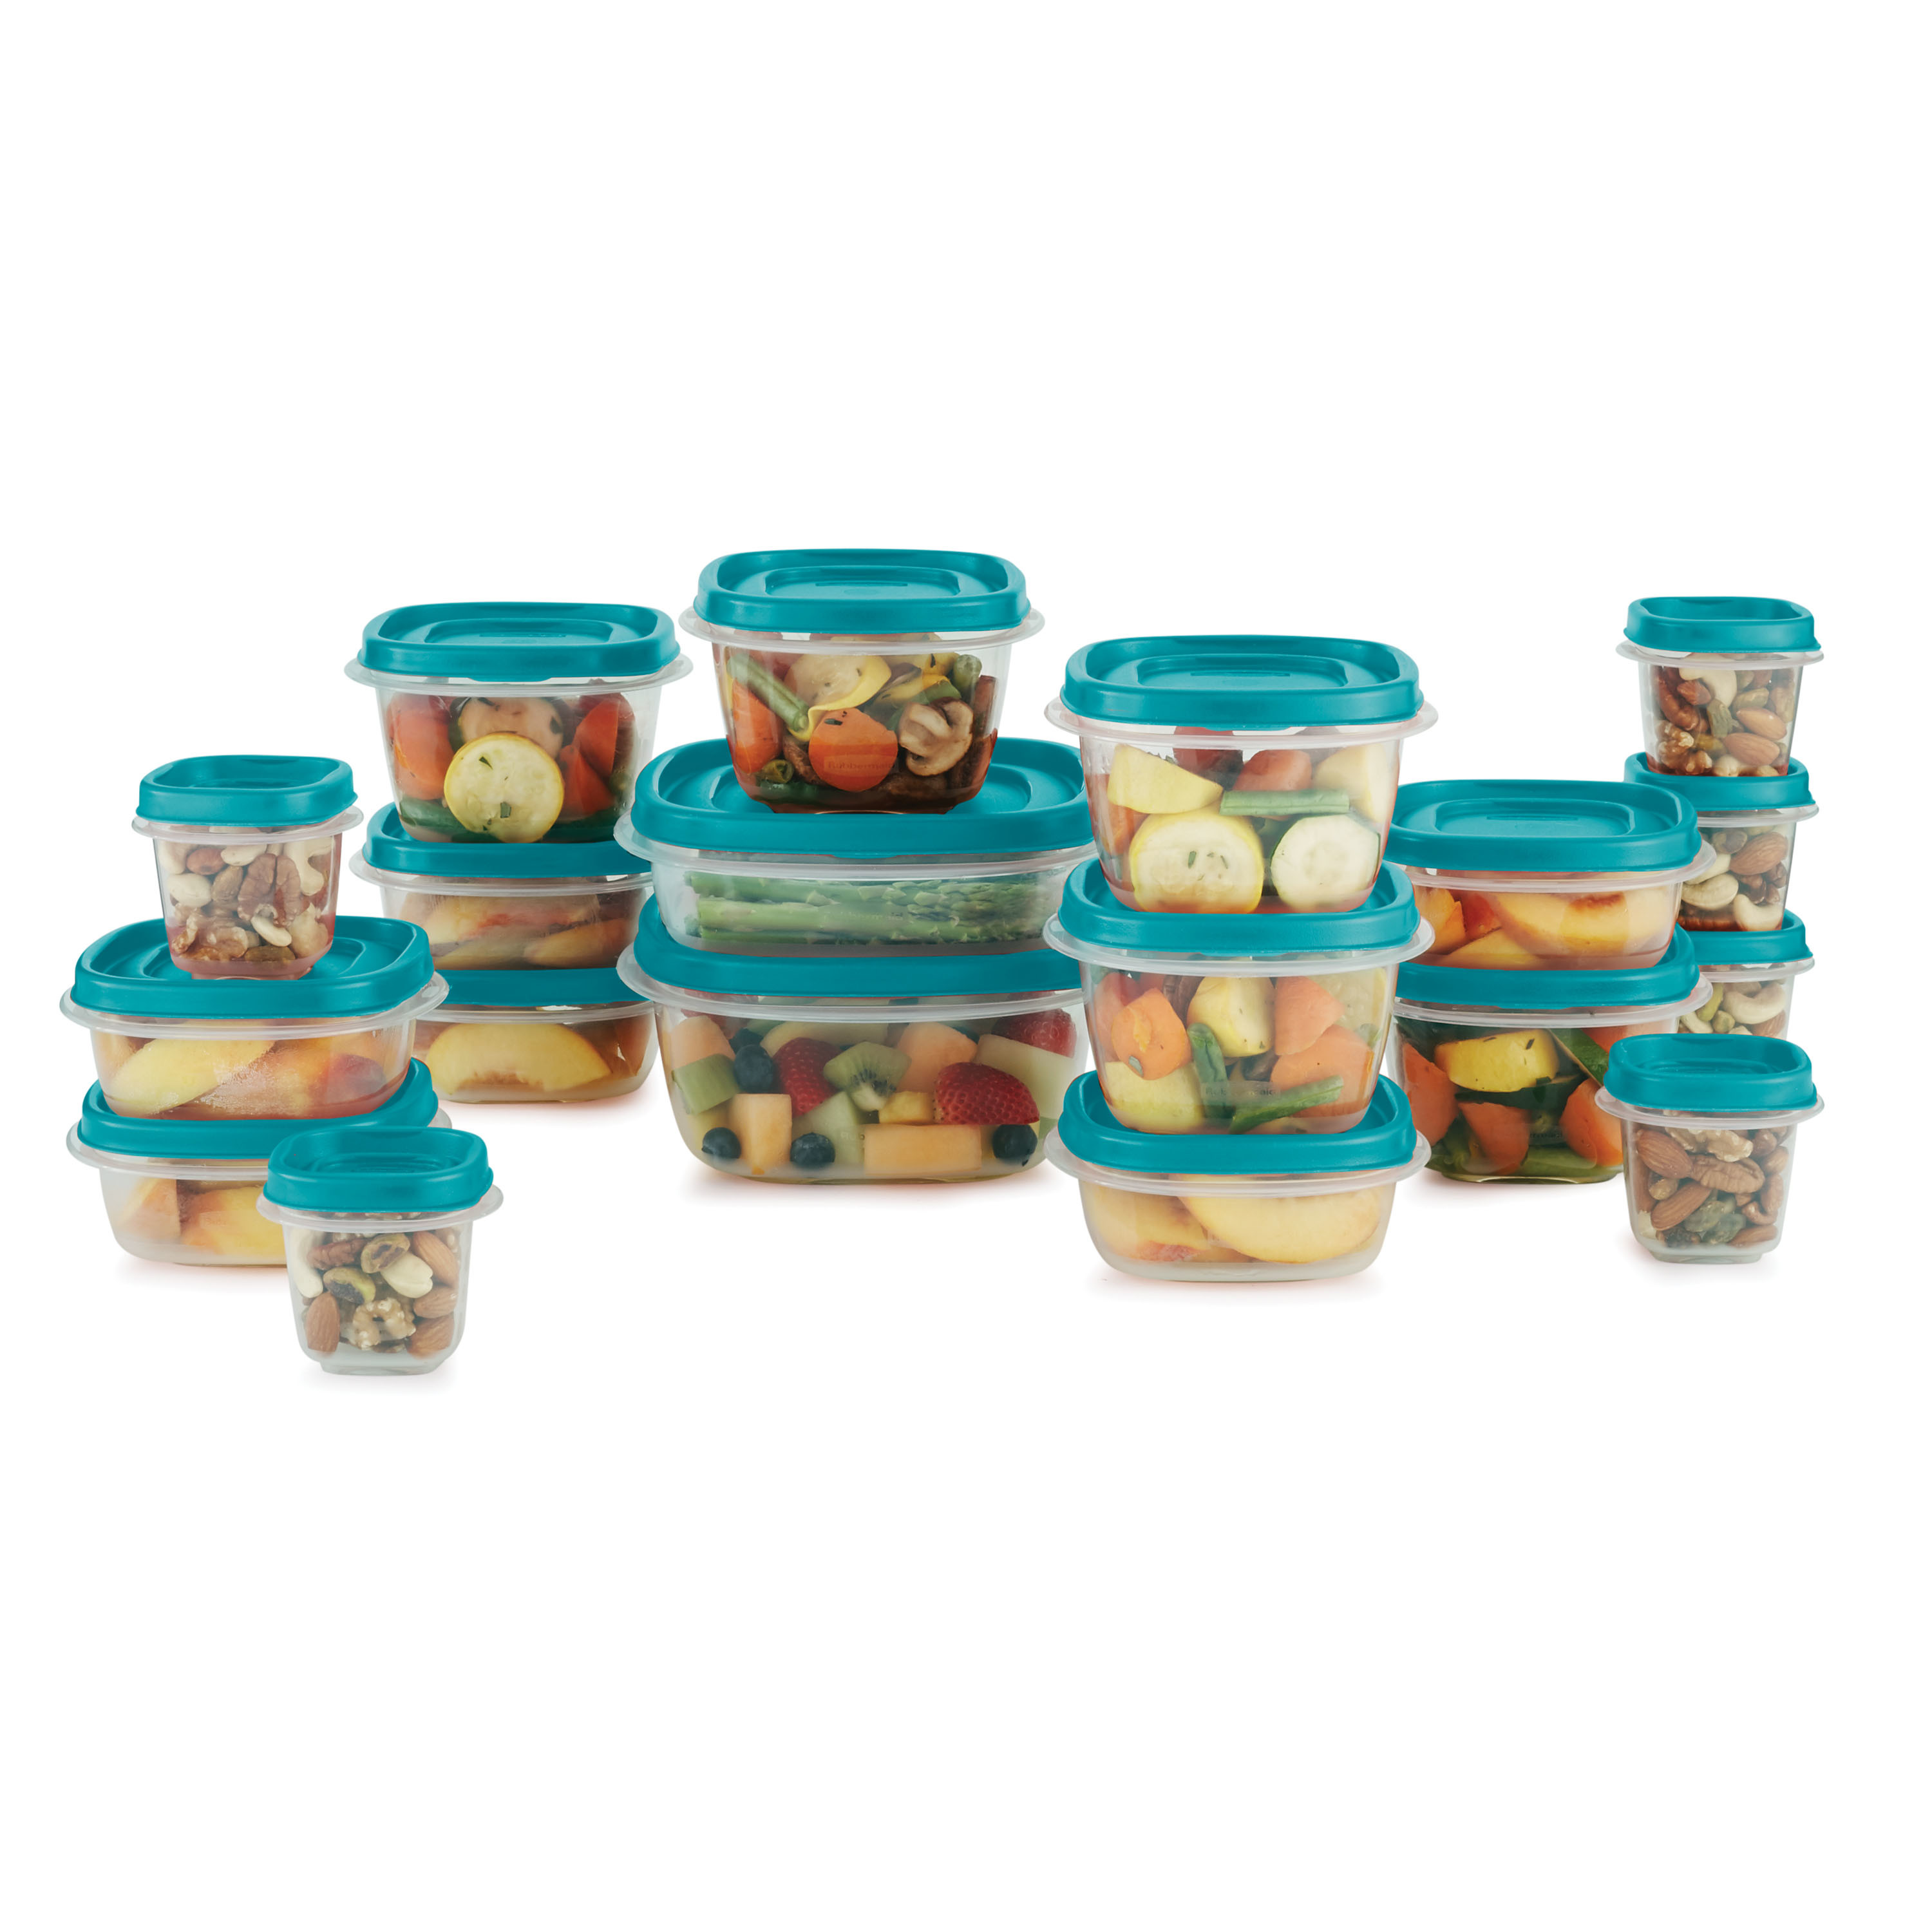 Rubbermaid Easy Find Vented Lids Food Storage Containers, 38-Piece Set, Teal - image 2 of 7